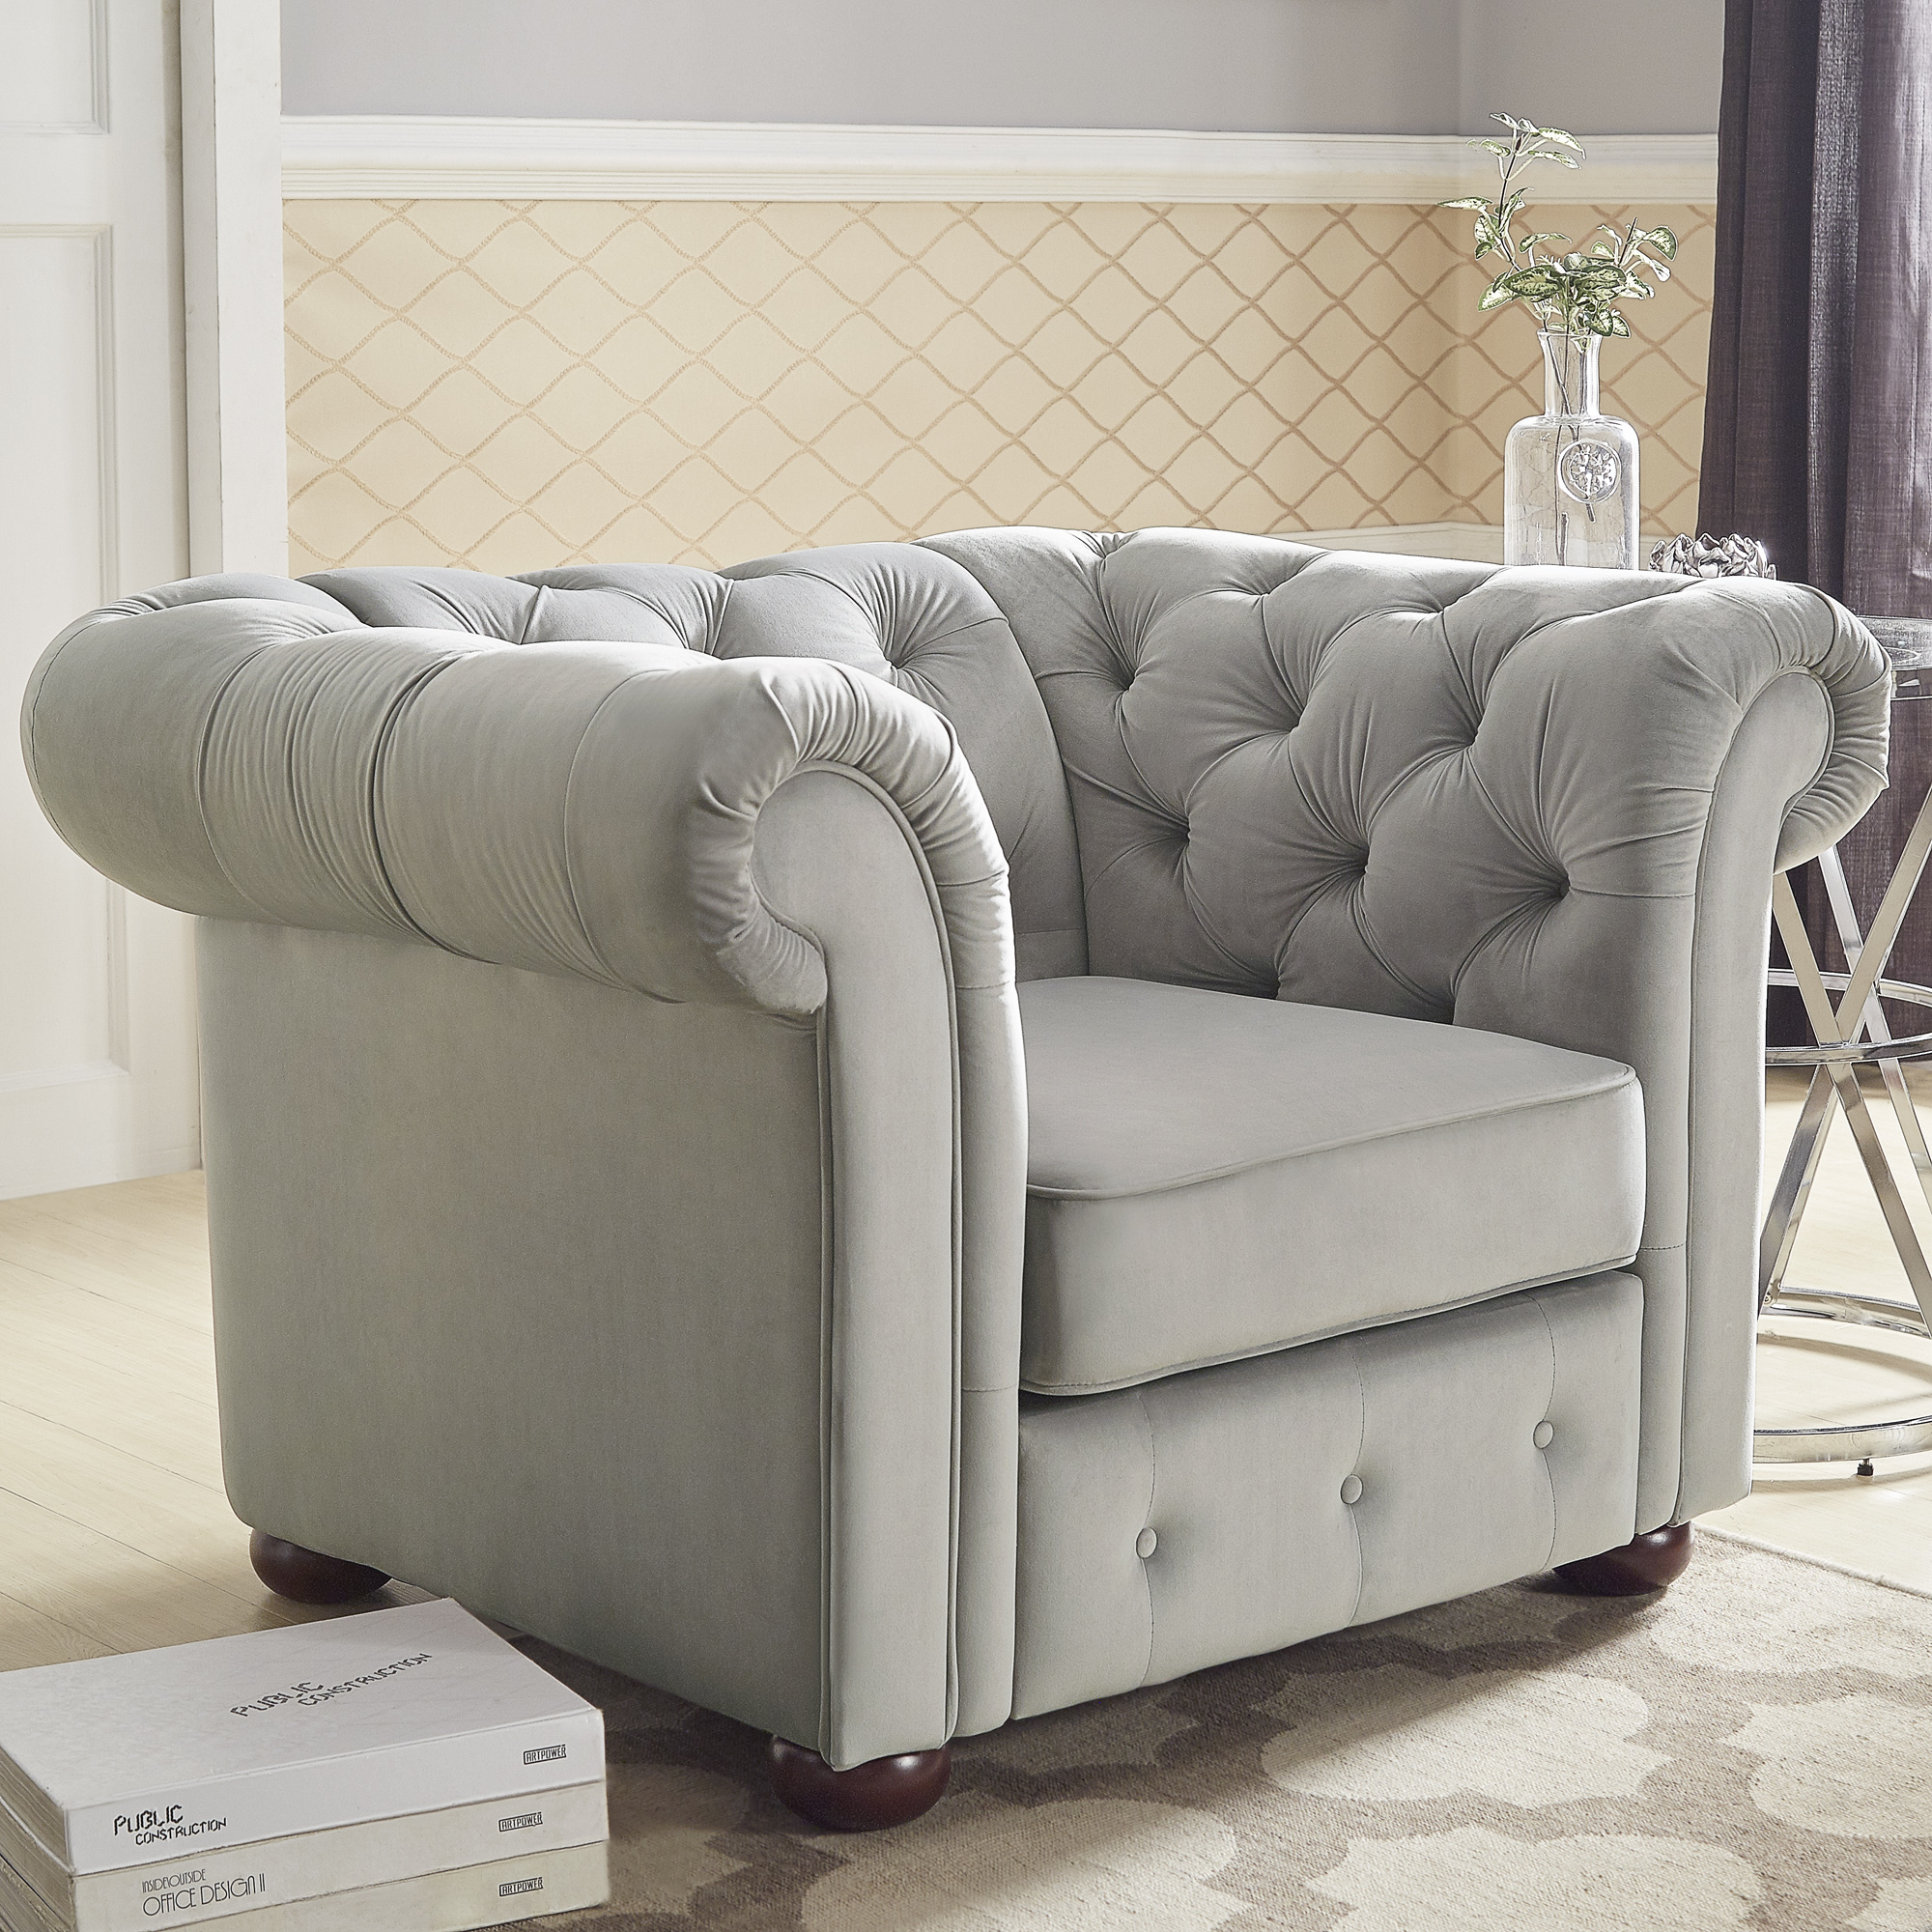 Tufted Scroll Arm Chesterfield Chair